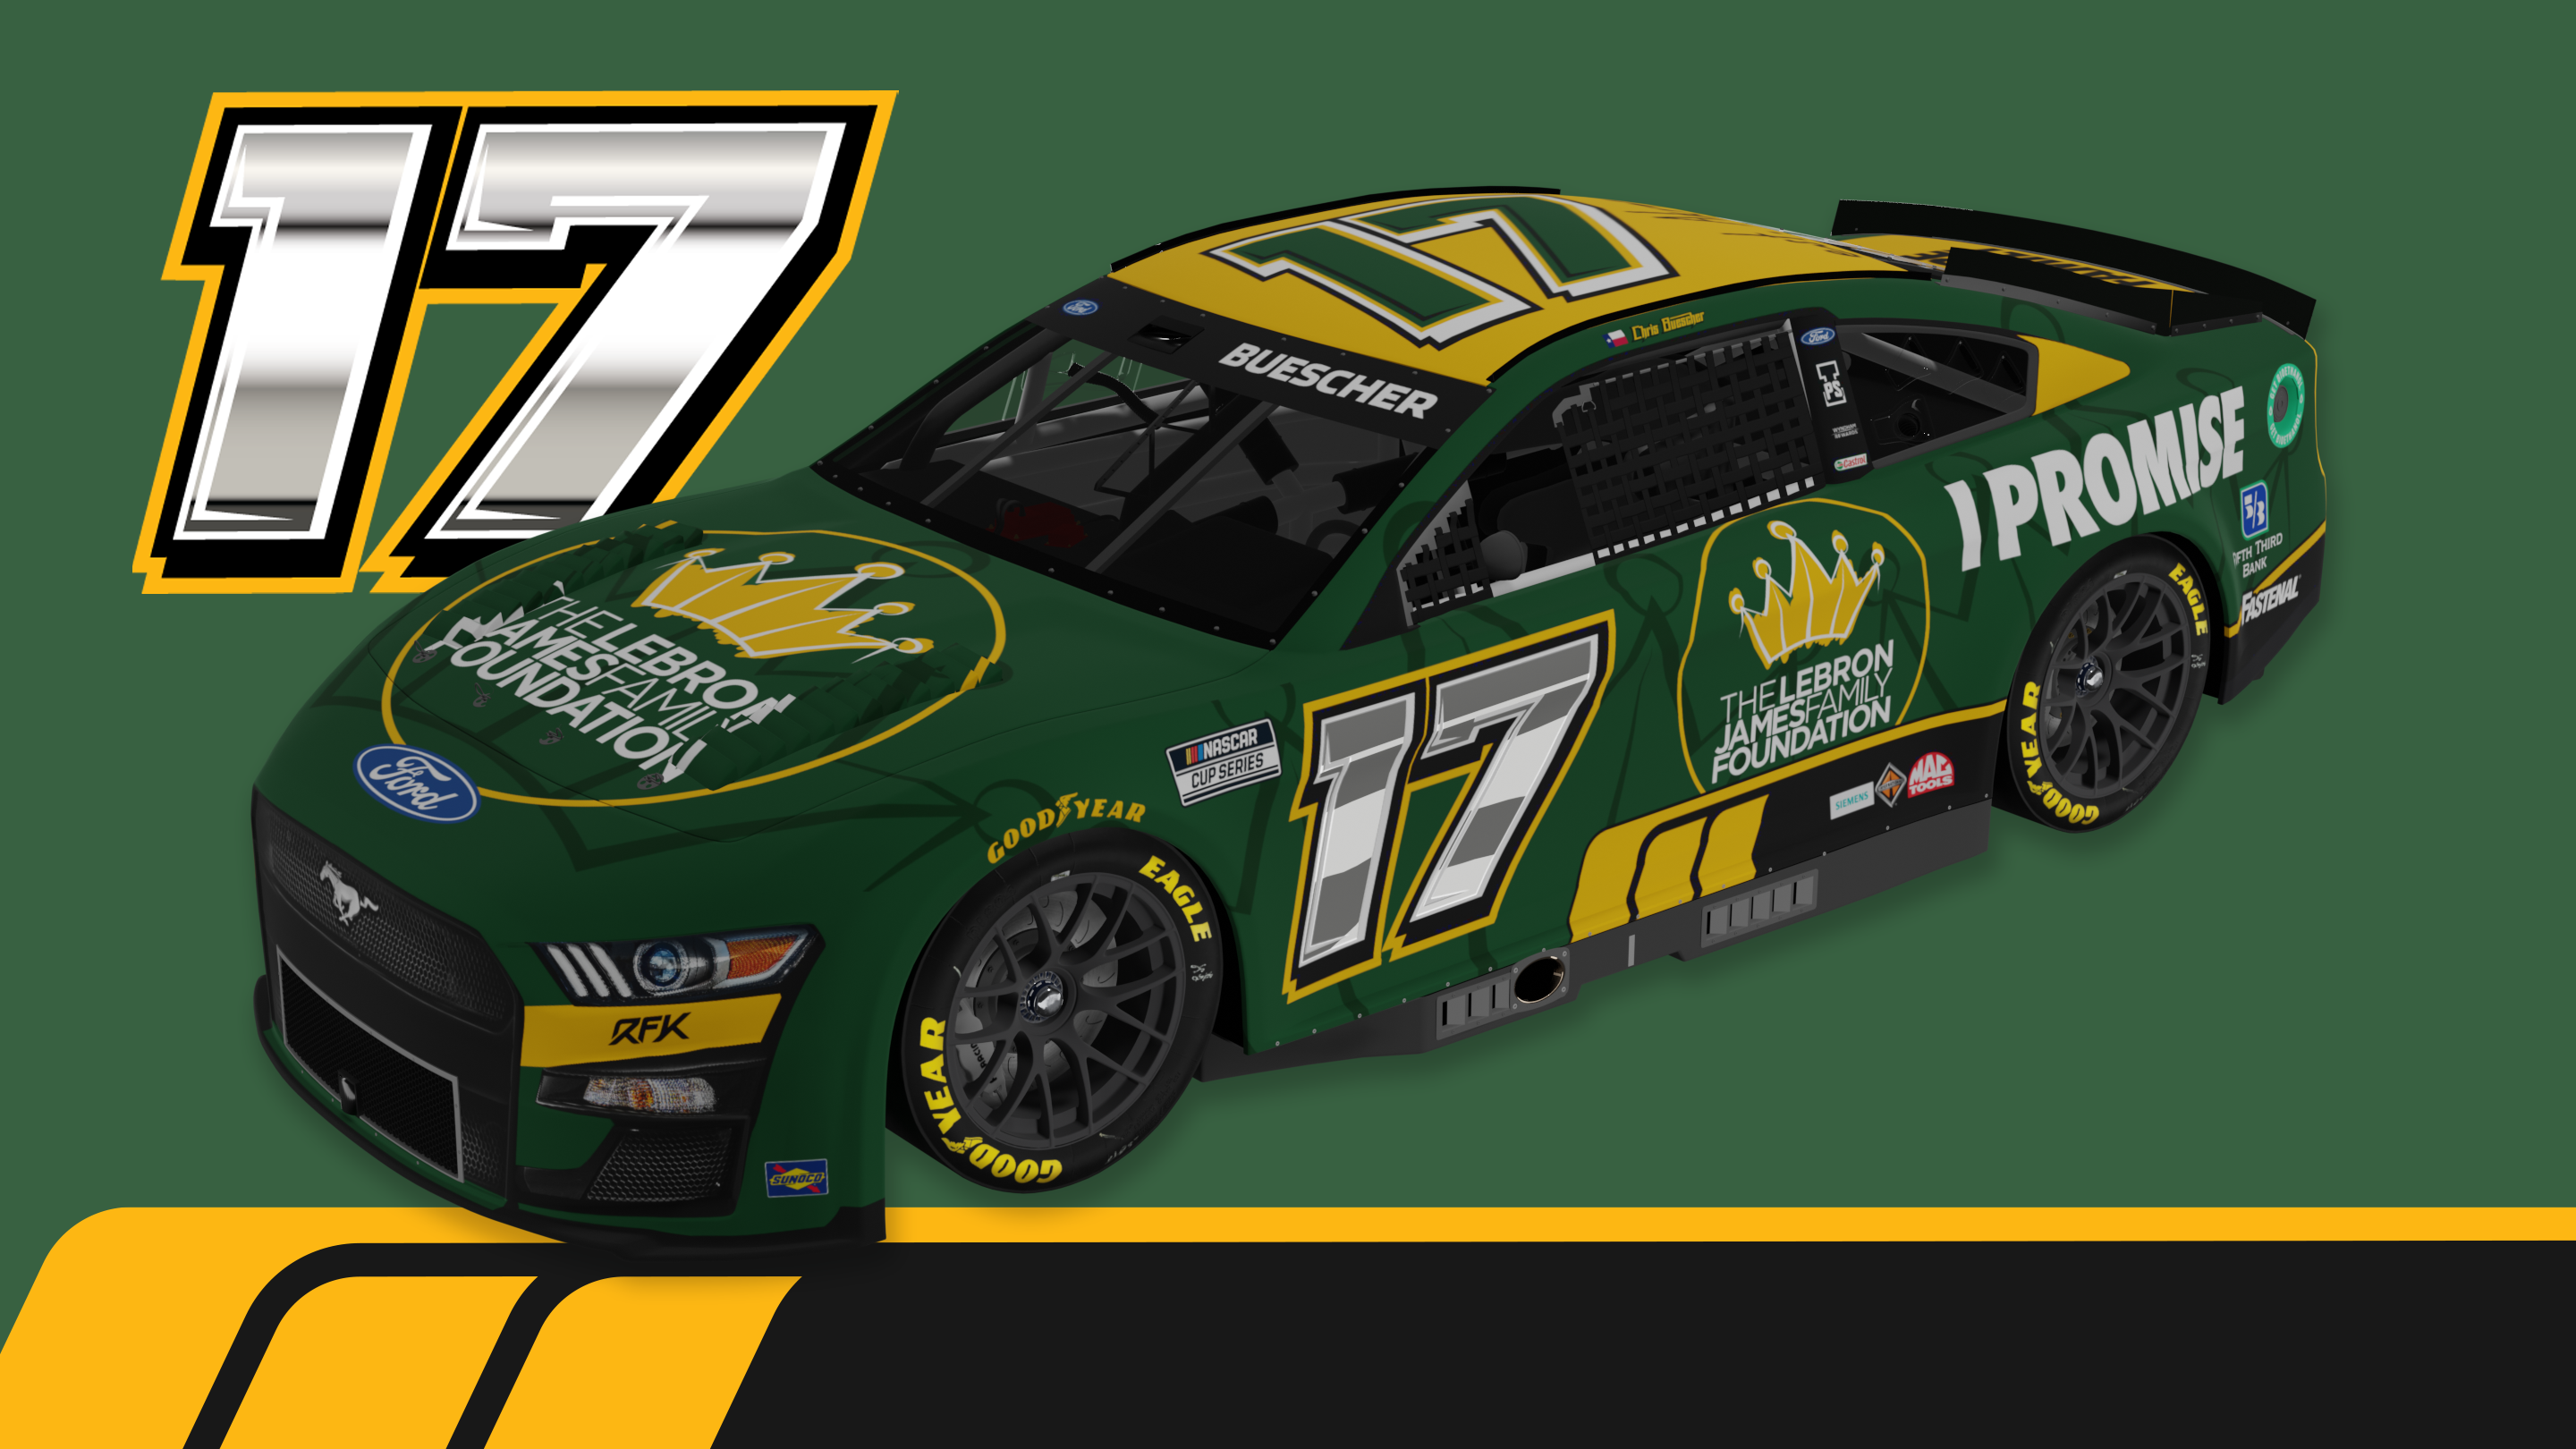 RFK Racing to Feature LeBron James Family Foundation on Chris Buescher’s No. 17 Ford for NASCAR Race at Michigan